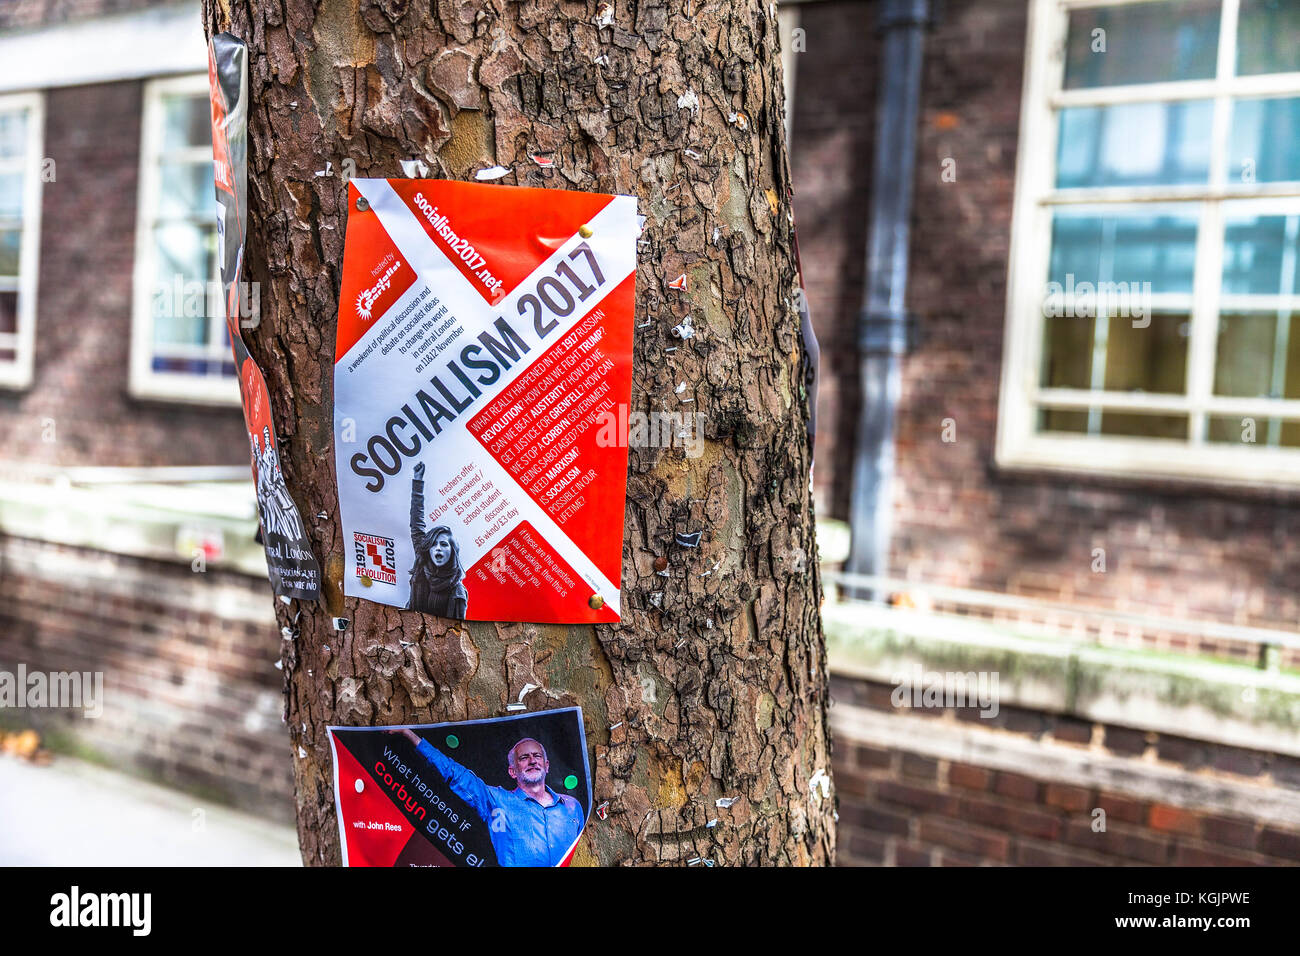 Socialism poster pinned to a tree trunk, Gower Street, Bloomsbury, London, England, UK. Stock Photo